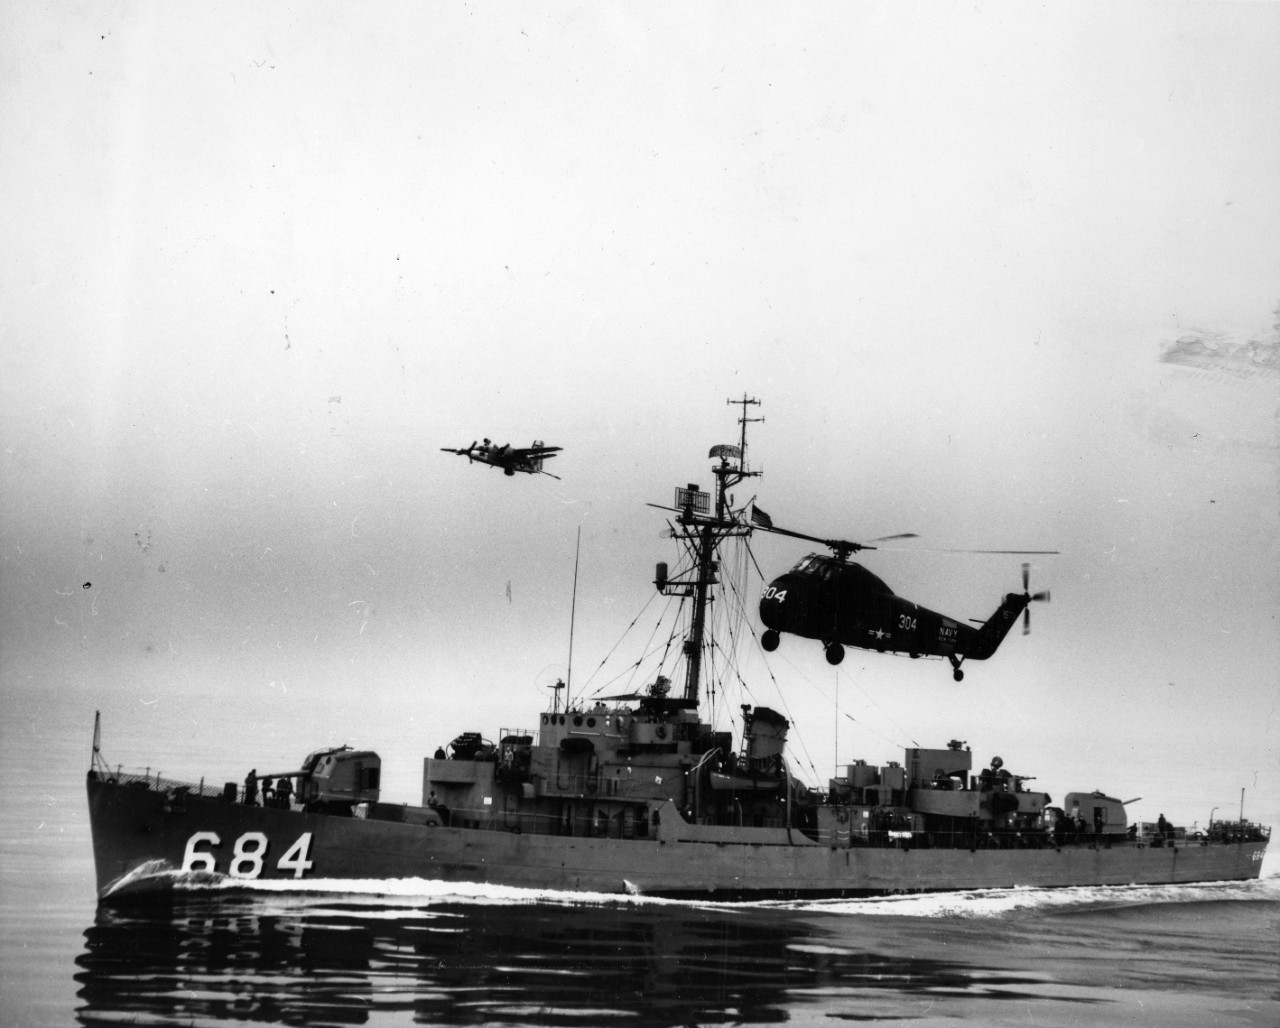 USS DeLong (DE-684) operating with ASW squadrons during Operation Minuteman, March 1960